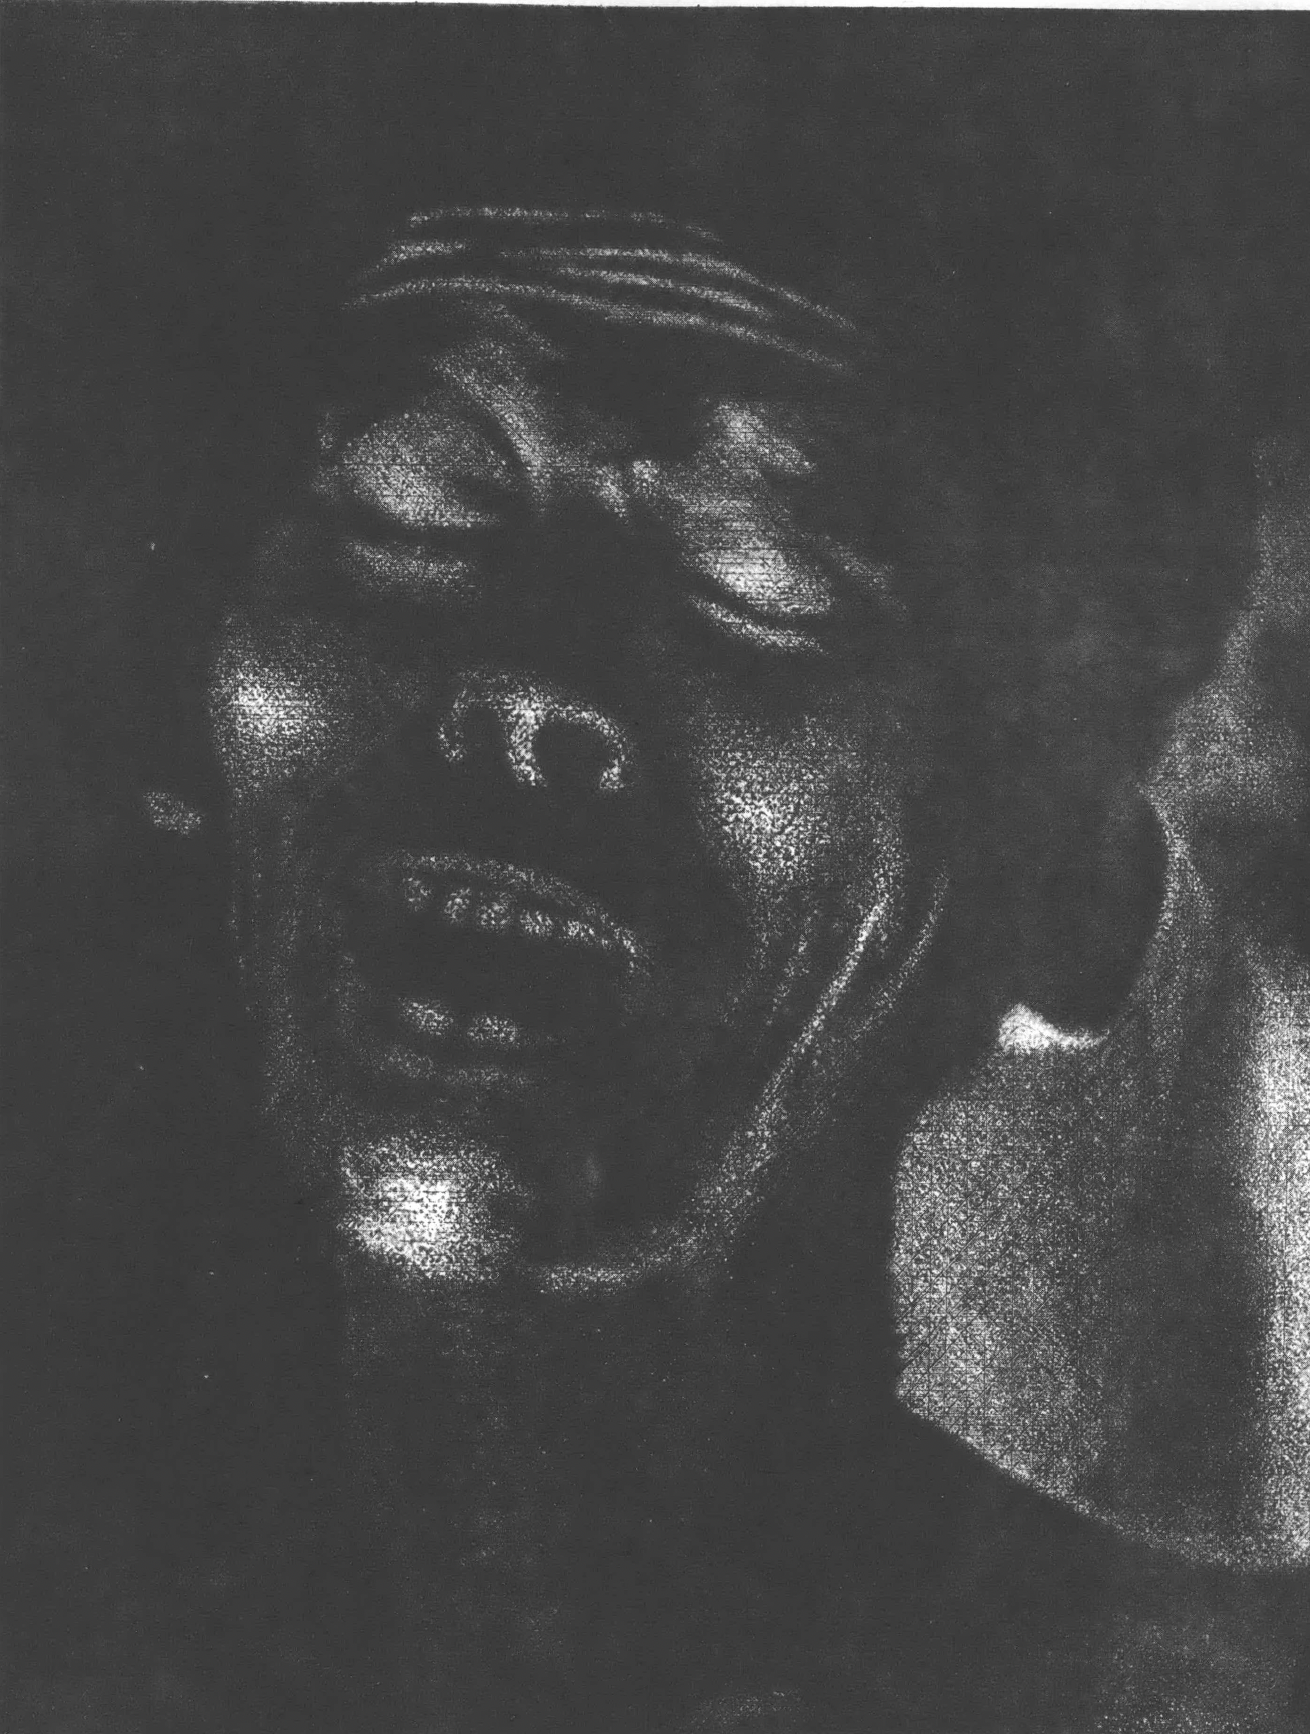 Black and white drawing of a Black woman, eyes closed, mouth open, possibly singing?